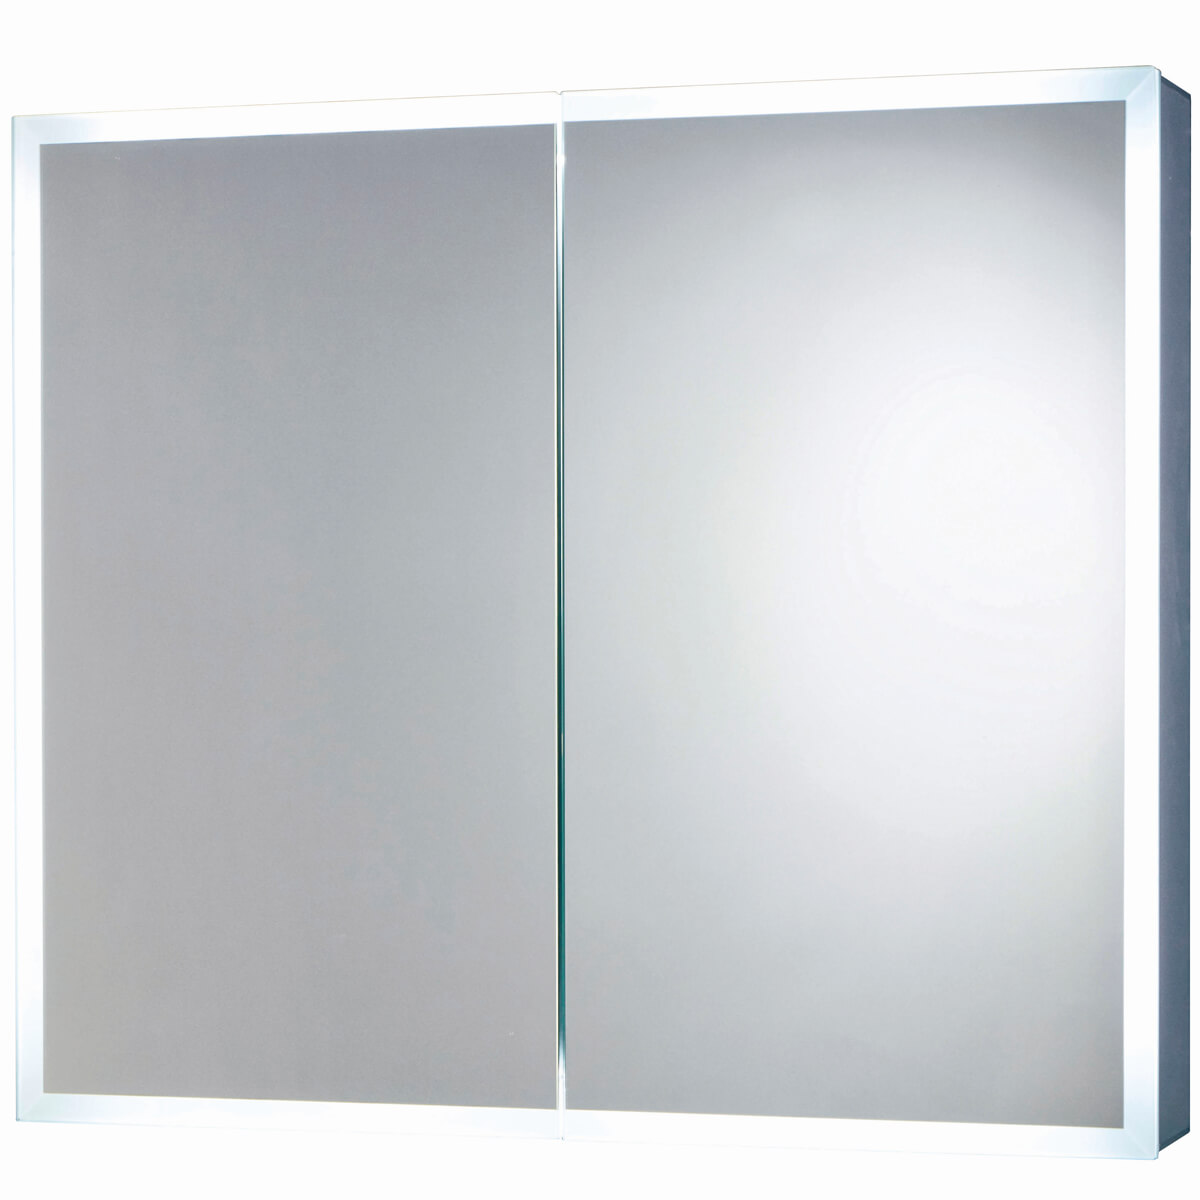 Miles Mia Mirror Cabinet With Demister Pad Shaver Socket